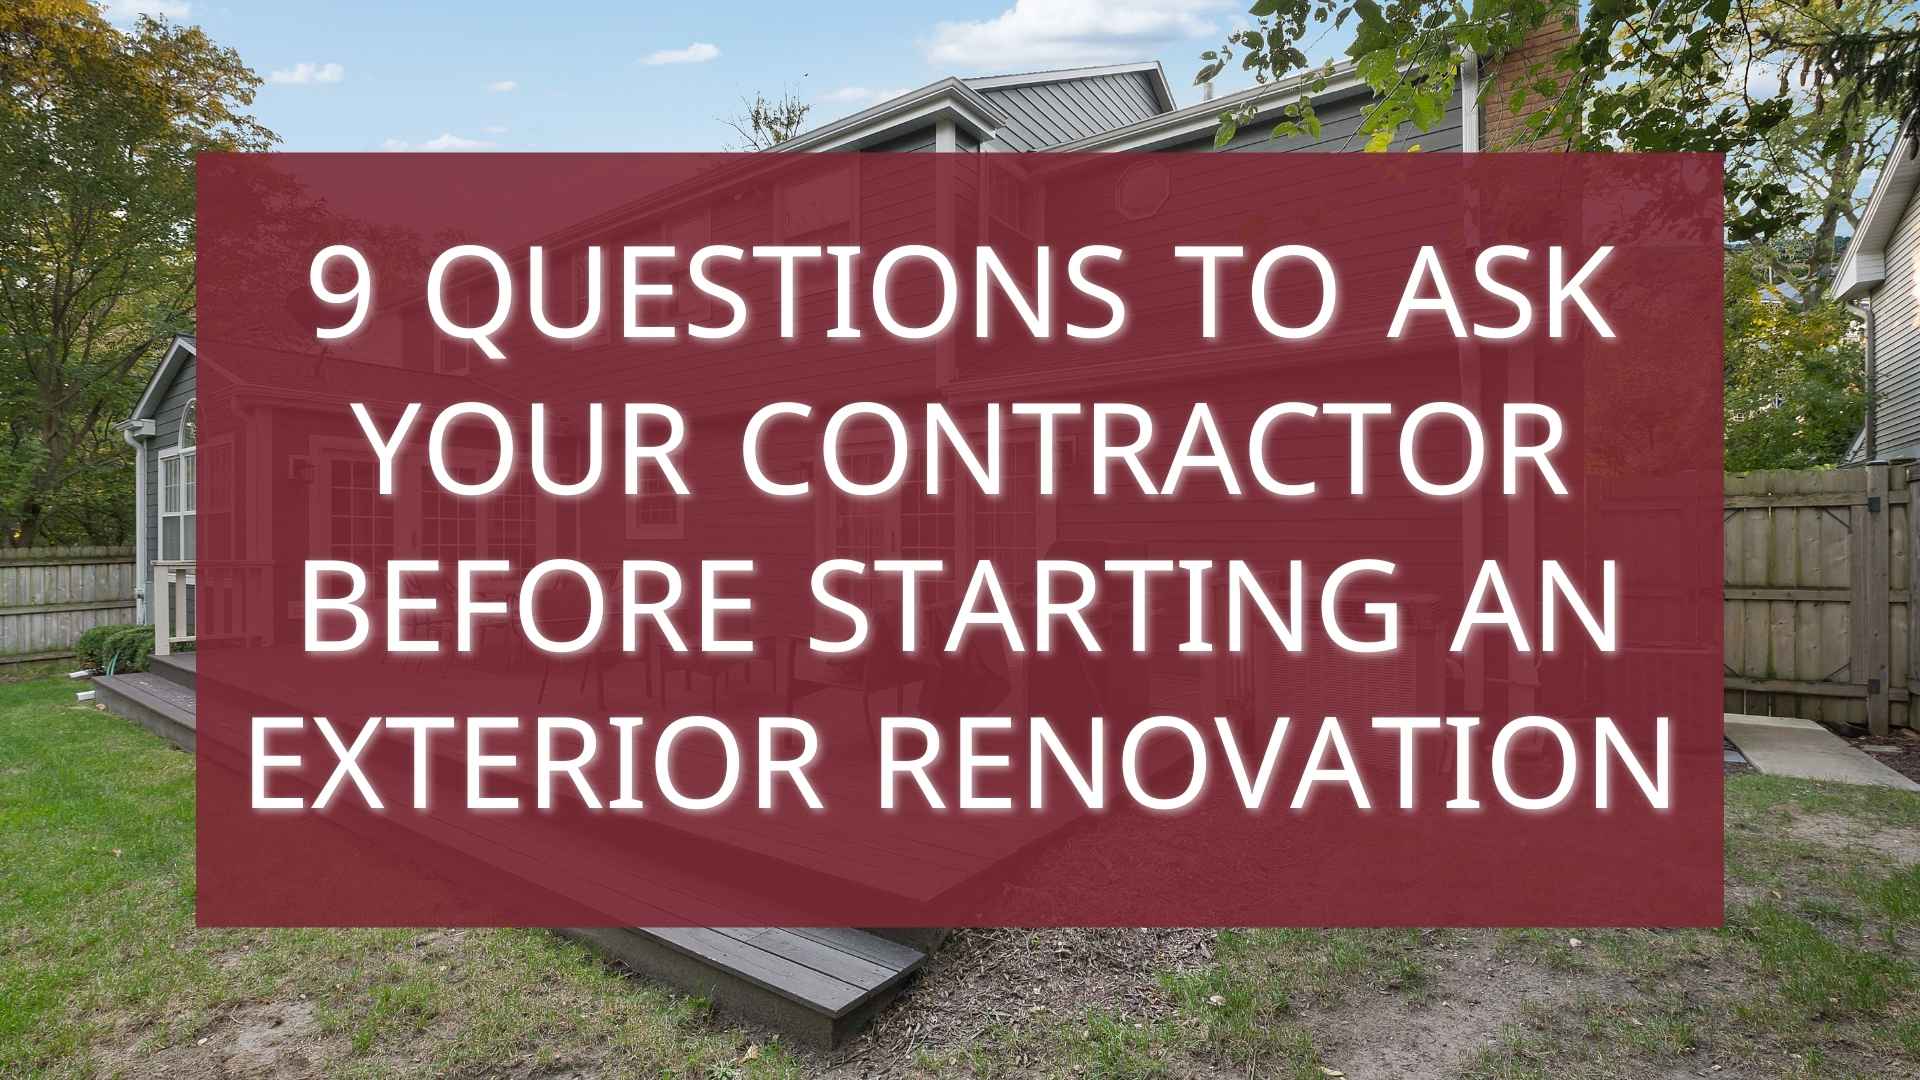 9 Questions to Ask Your Contractor Before Starting an Exterior Renovation